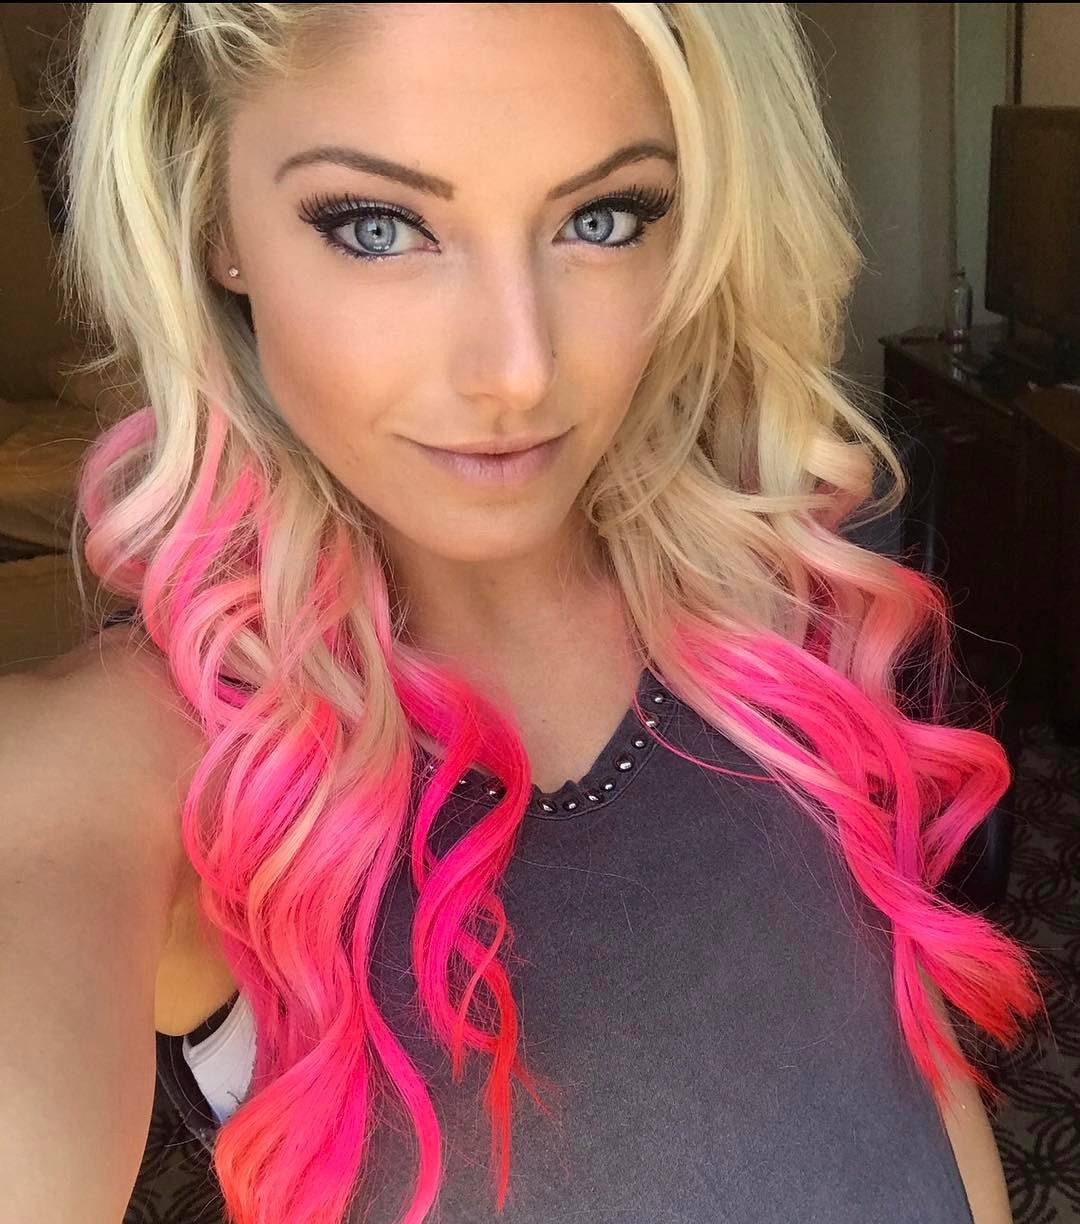 Alexa Bliss Nude 1 Pictures Rating 8 44 10